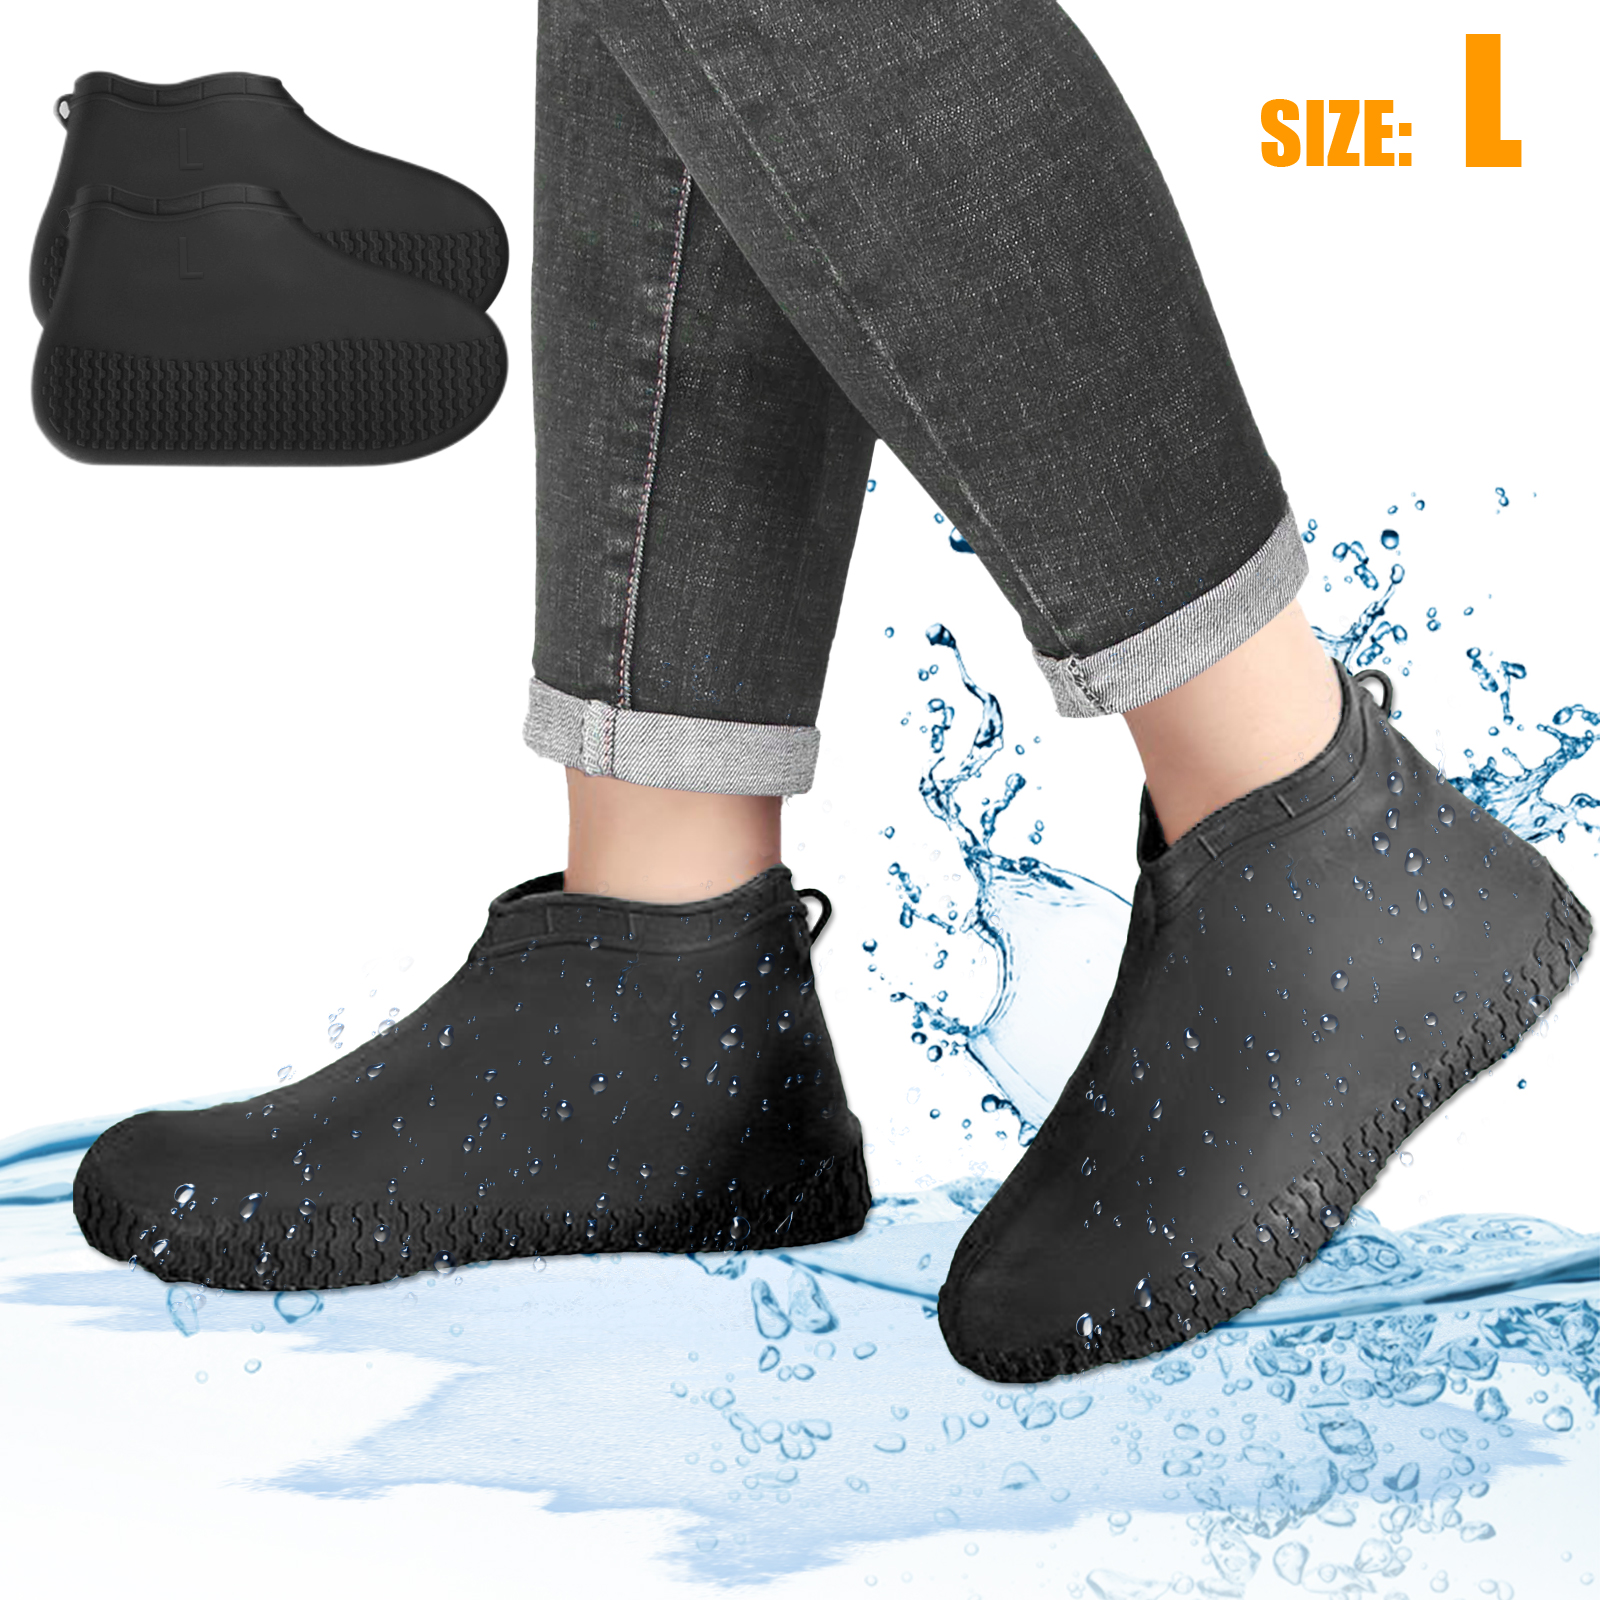 Silicone Overshoes Rain Waterproof Shoe Covers Boot Cover Protector Anti-Slip 